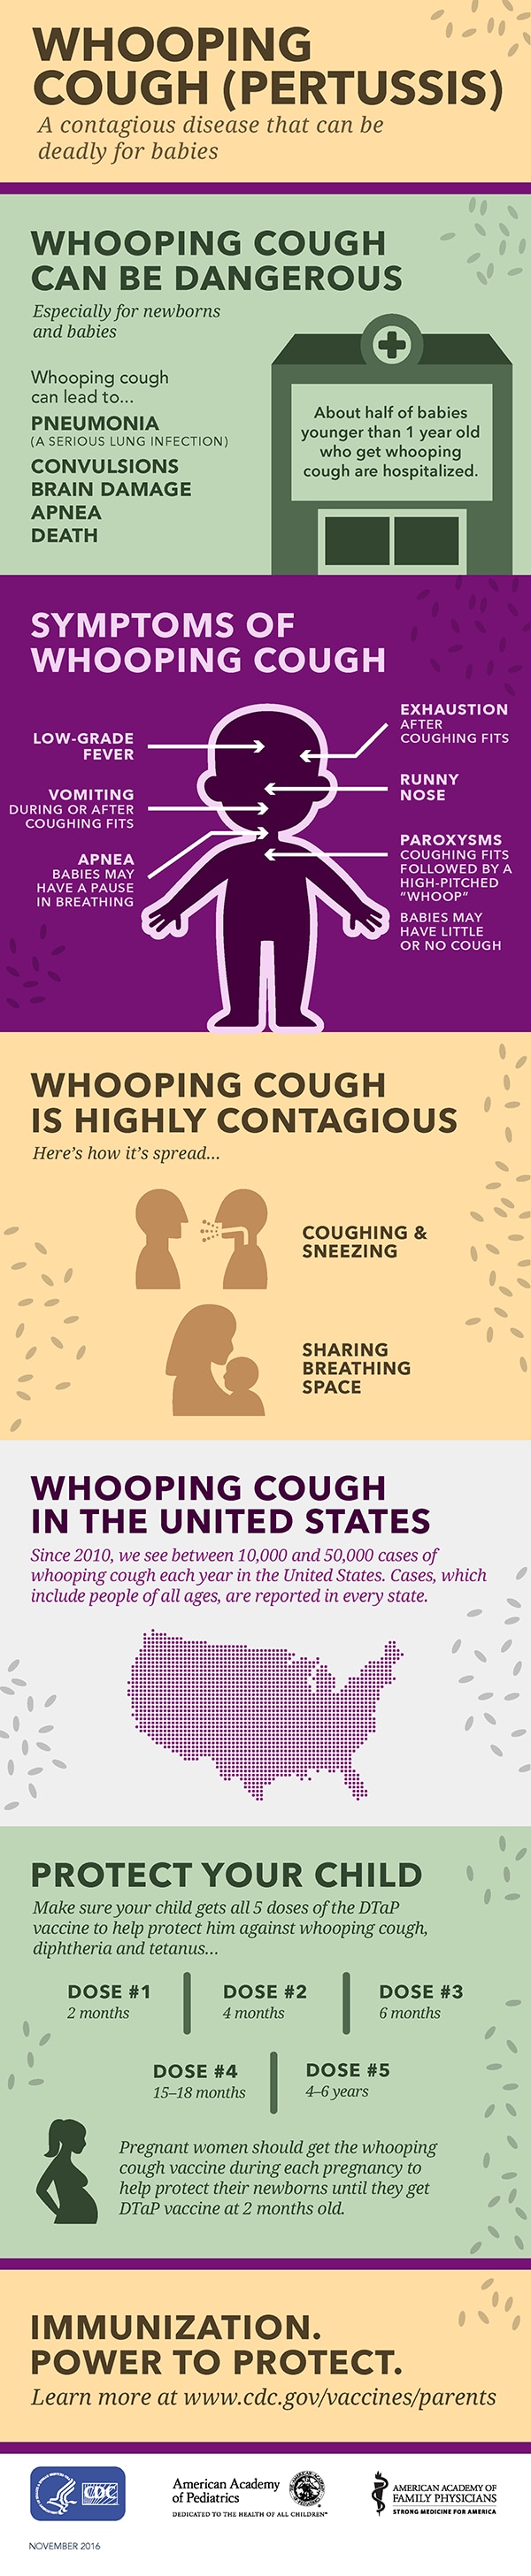 Infographic: Whooping cough (pertussis). A contagious disease that can be deadly for babies.